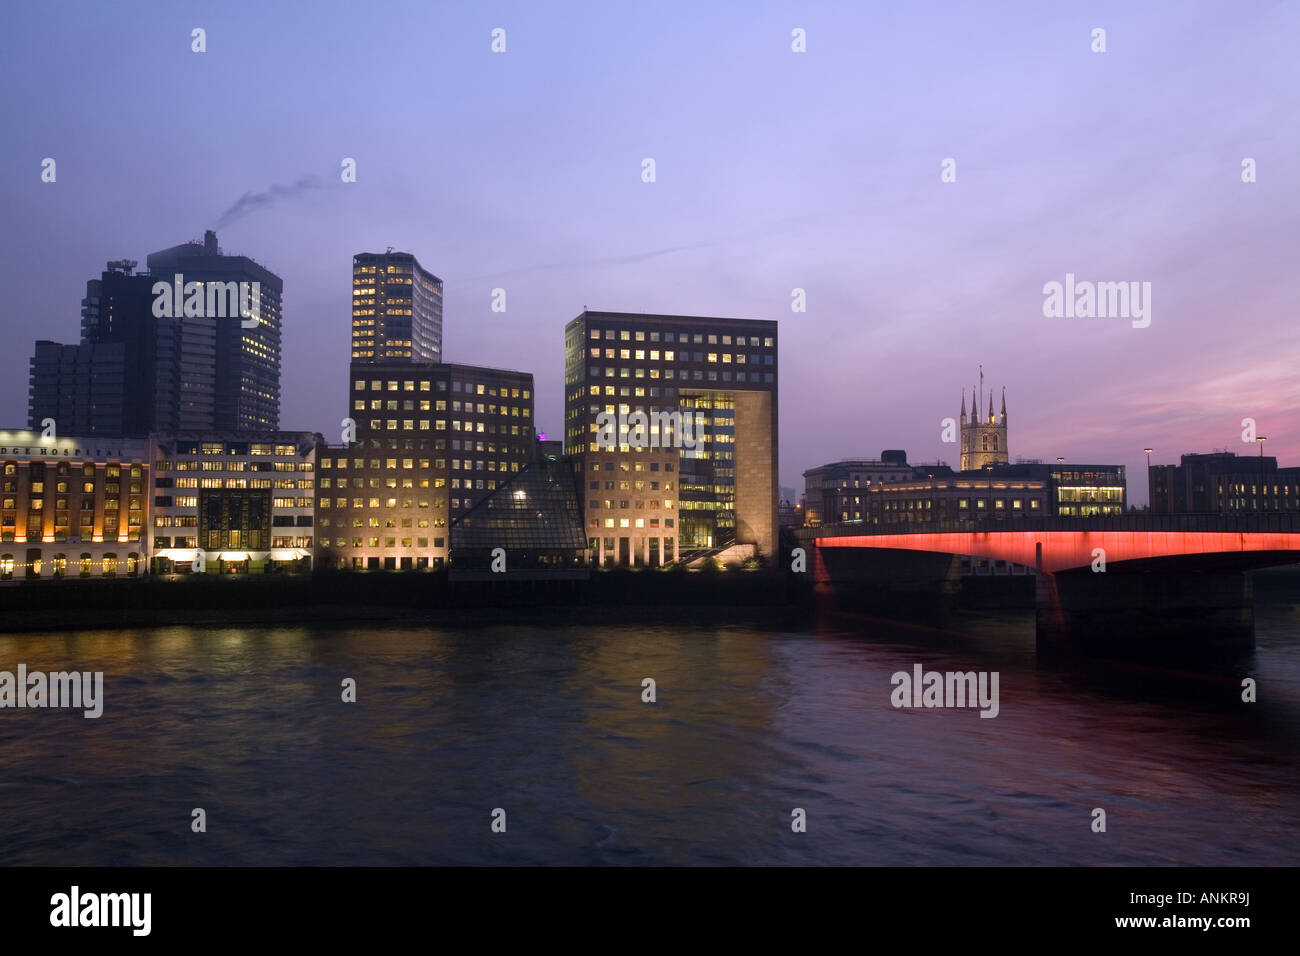 London, England. London Bridge and office buildings along the Thames River Stock Photo